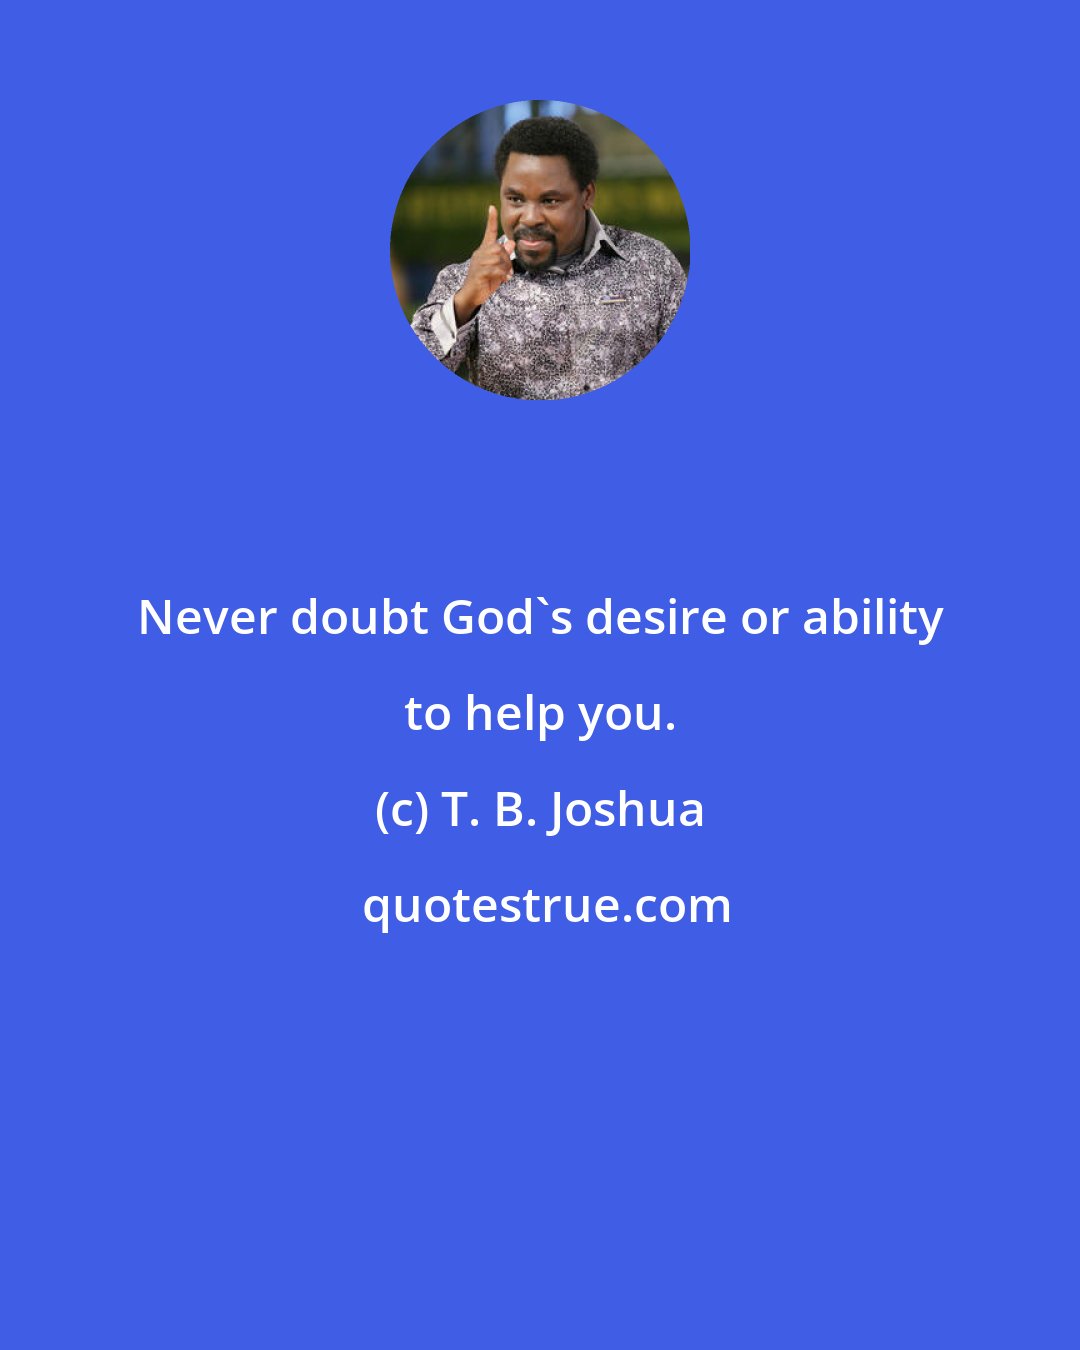 T. B. Joshua: Never doubt God's desire or ability to help you.